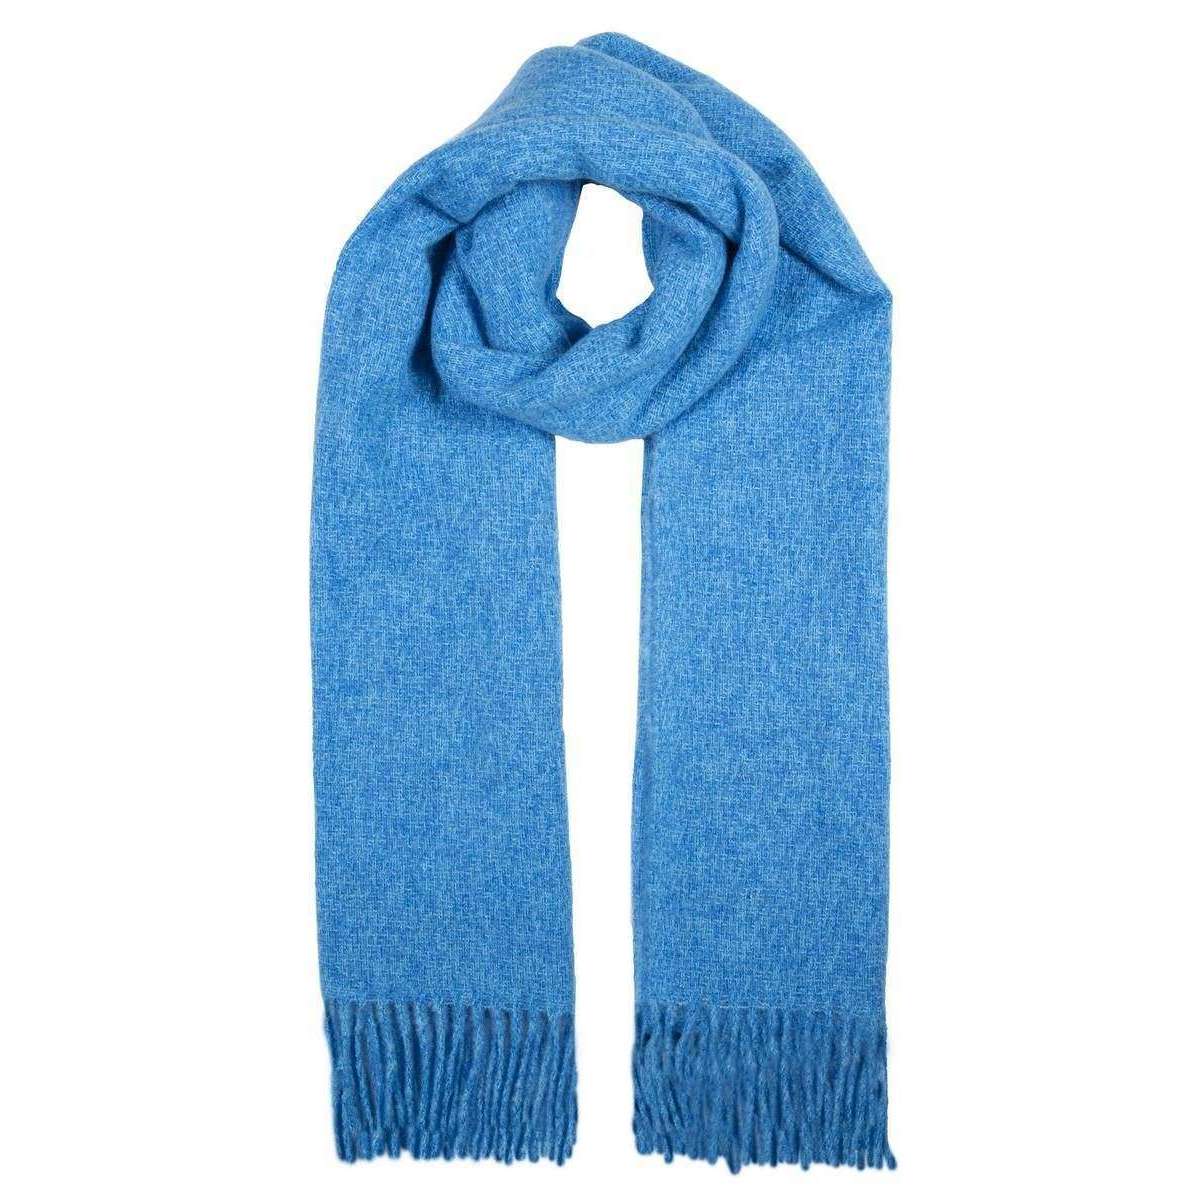 Dents Tweed Stole Scarf - Blue